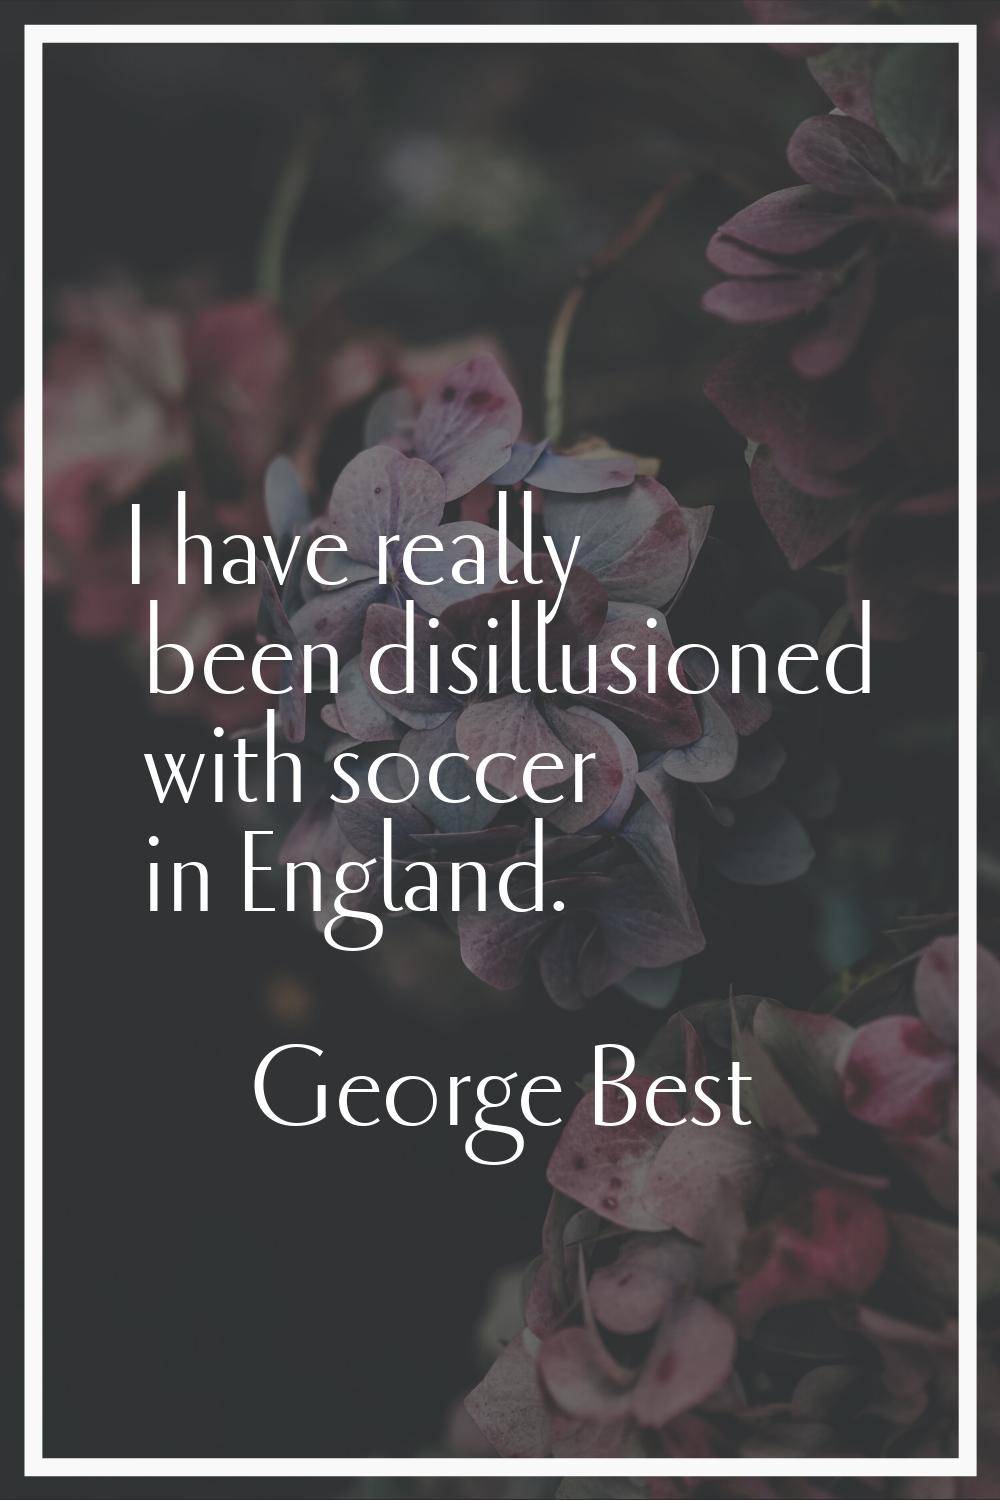 I have really been disillusioned with soccer in England.